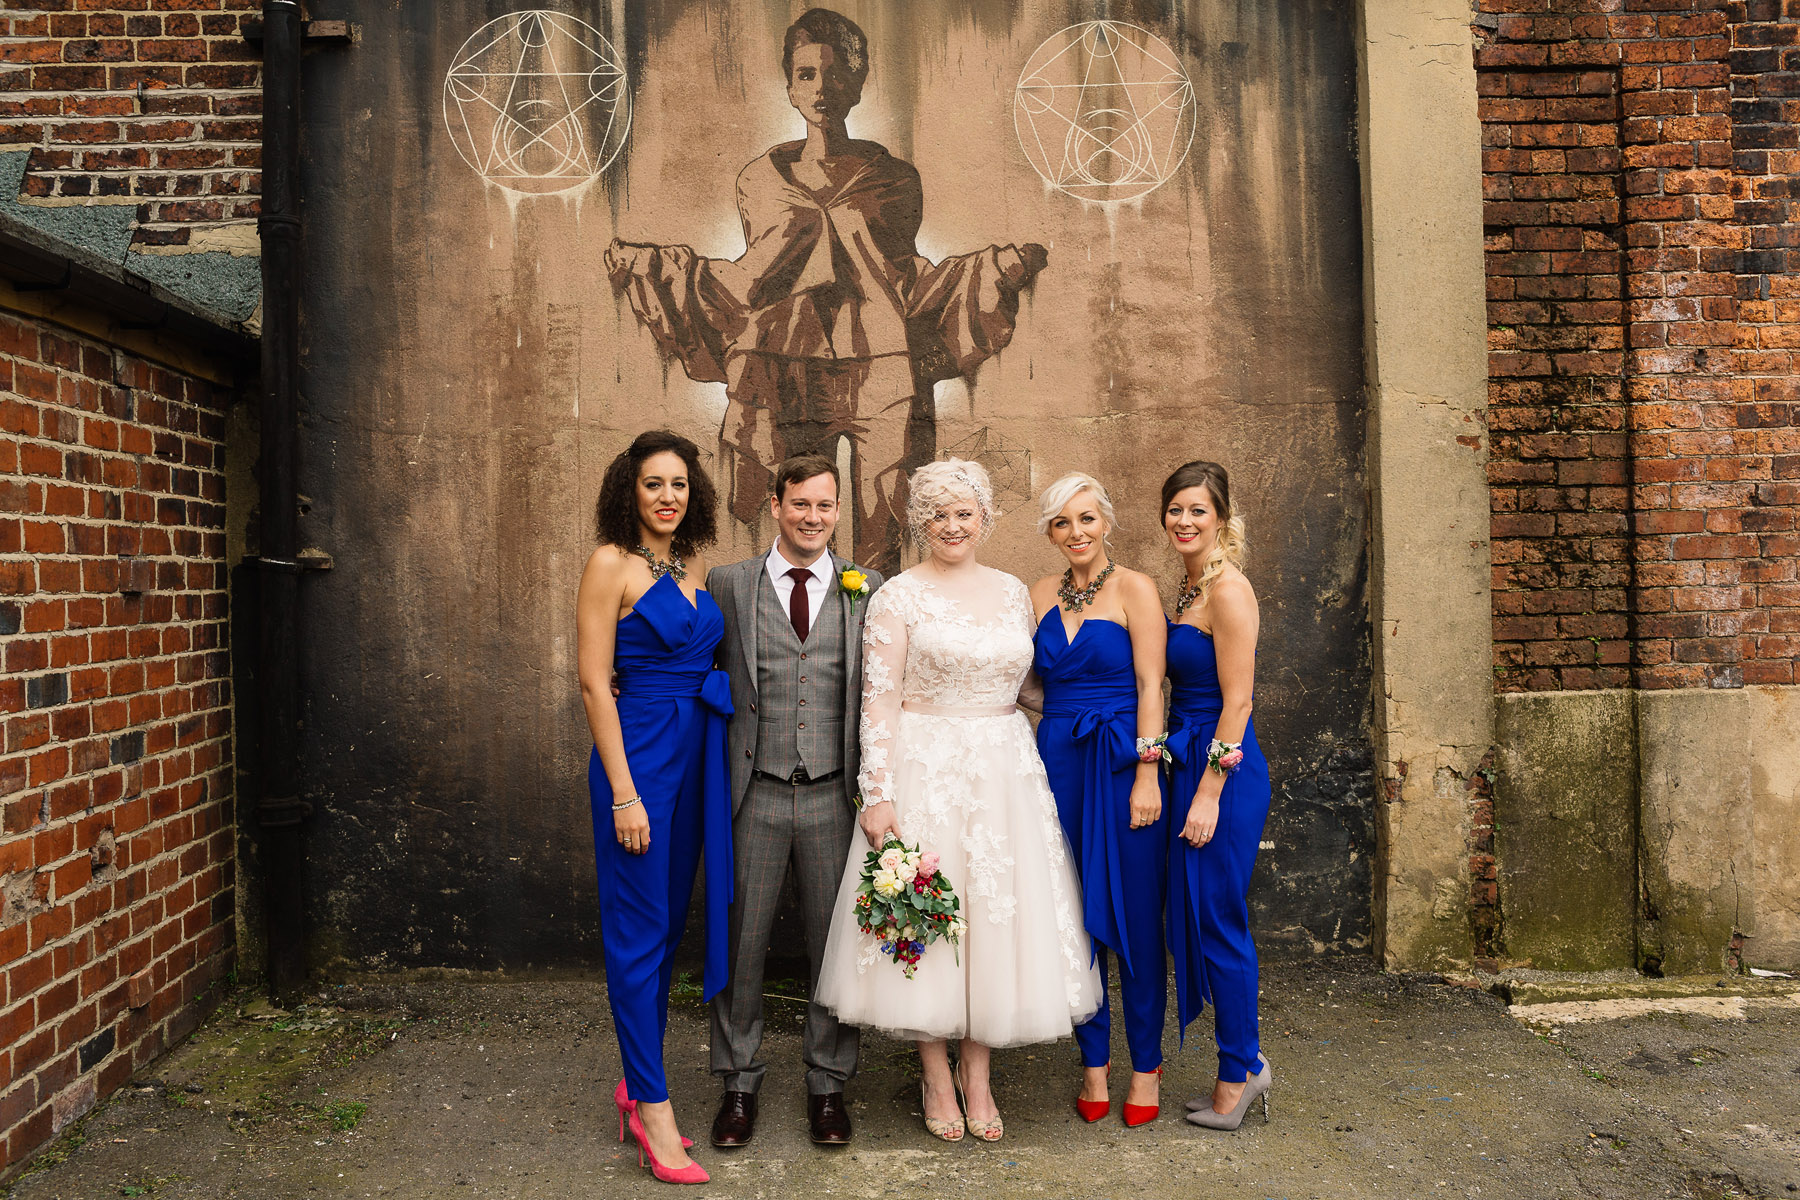 Emma + Dave's warehouse wedding at Canal Mills in Leeds by Paul Joseph Photography.